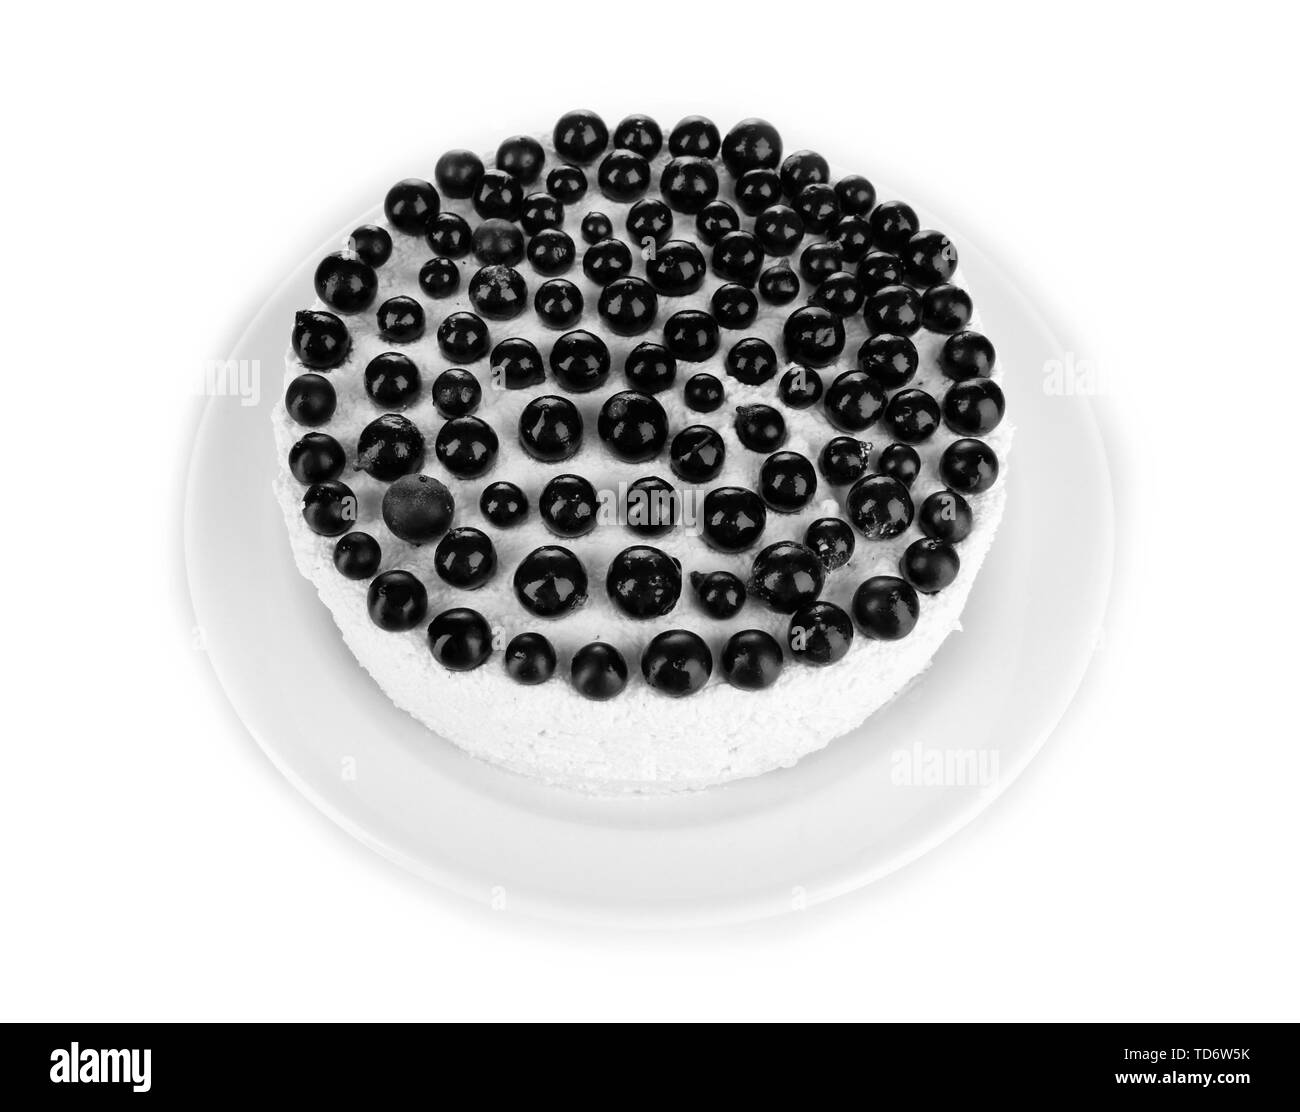 Cheesecake with fresh berries on white plate isolated on white Stock Photo